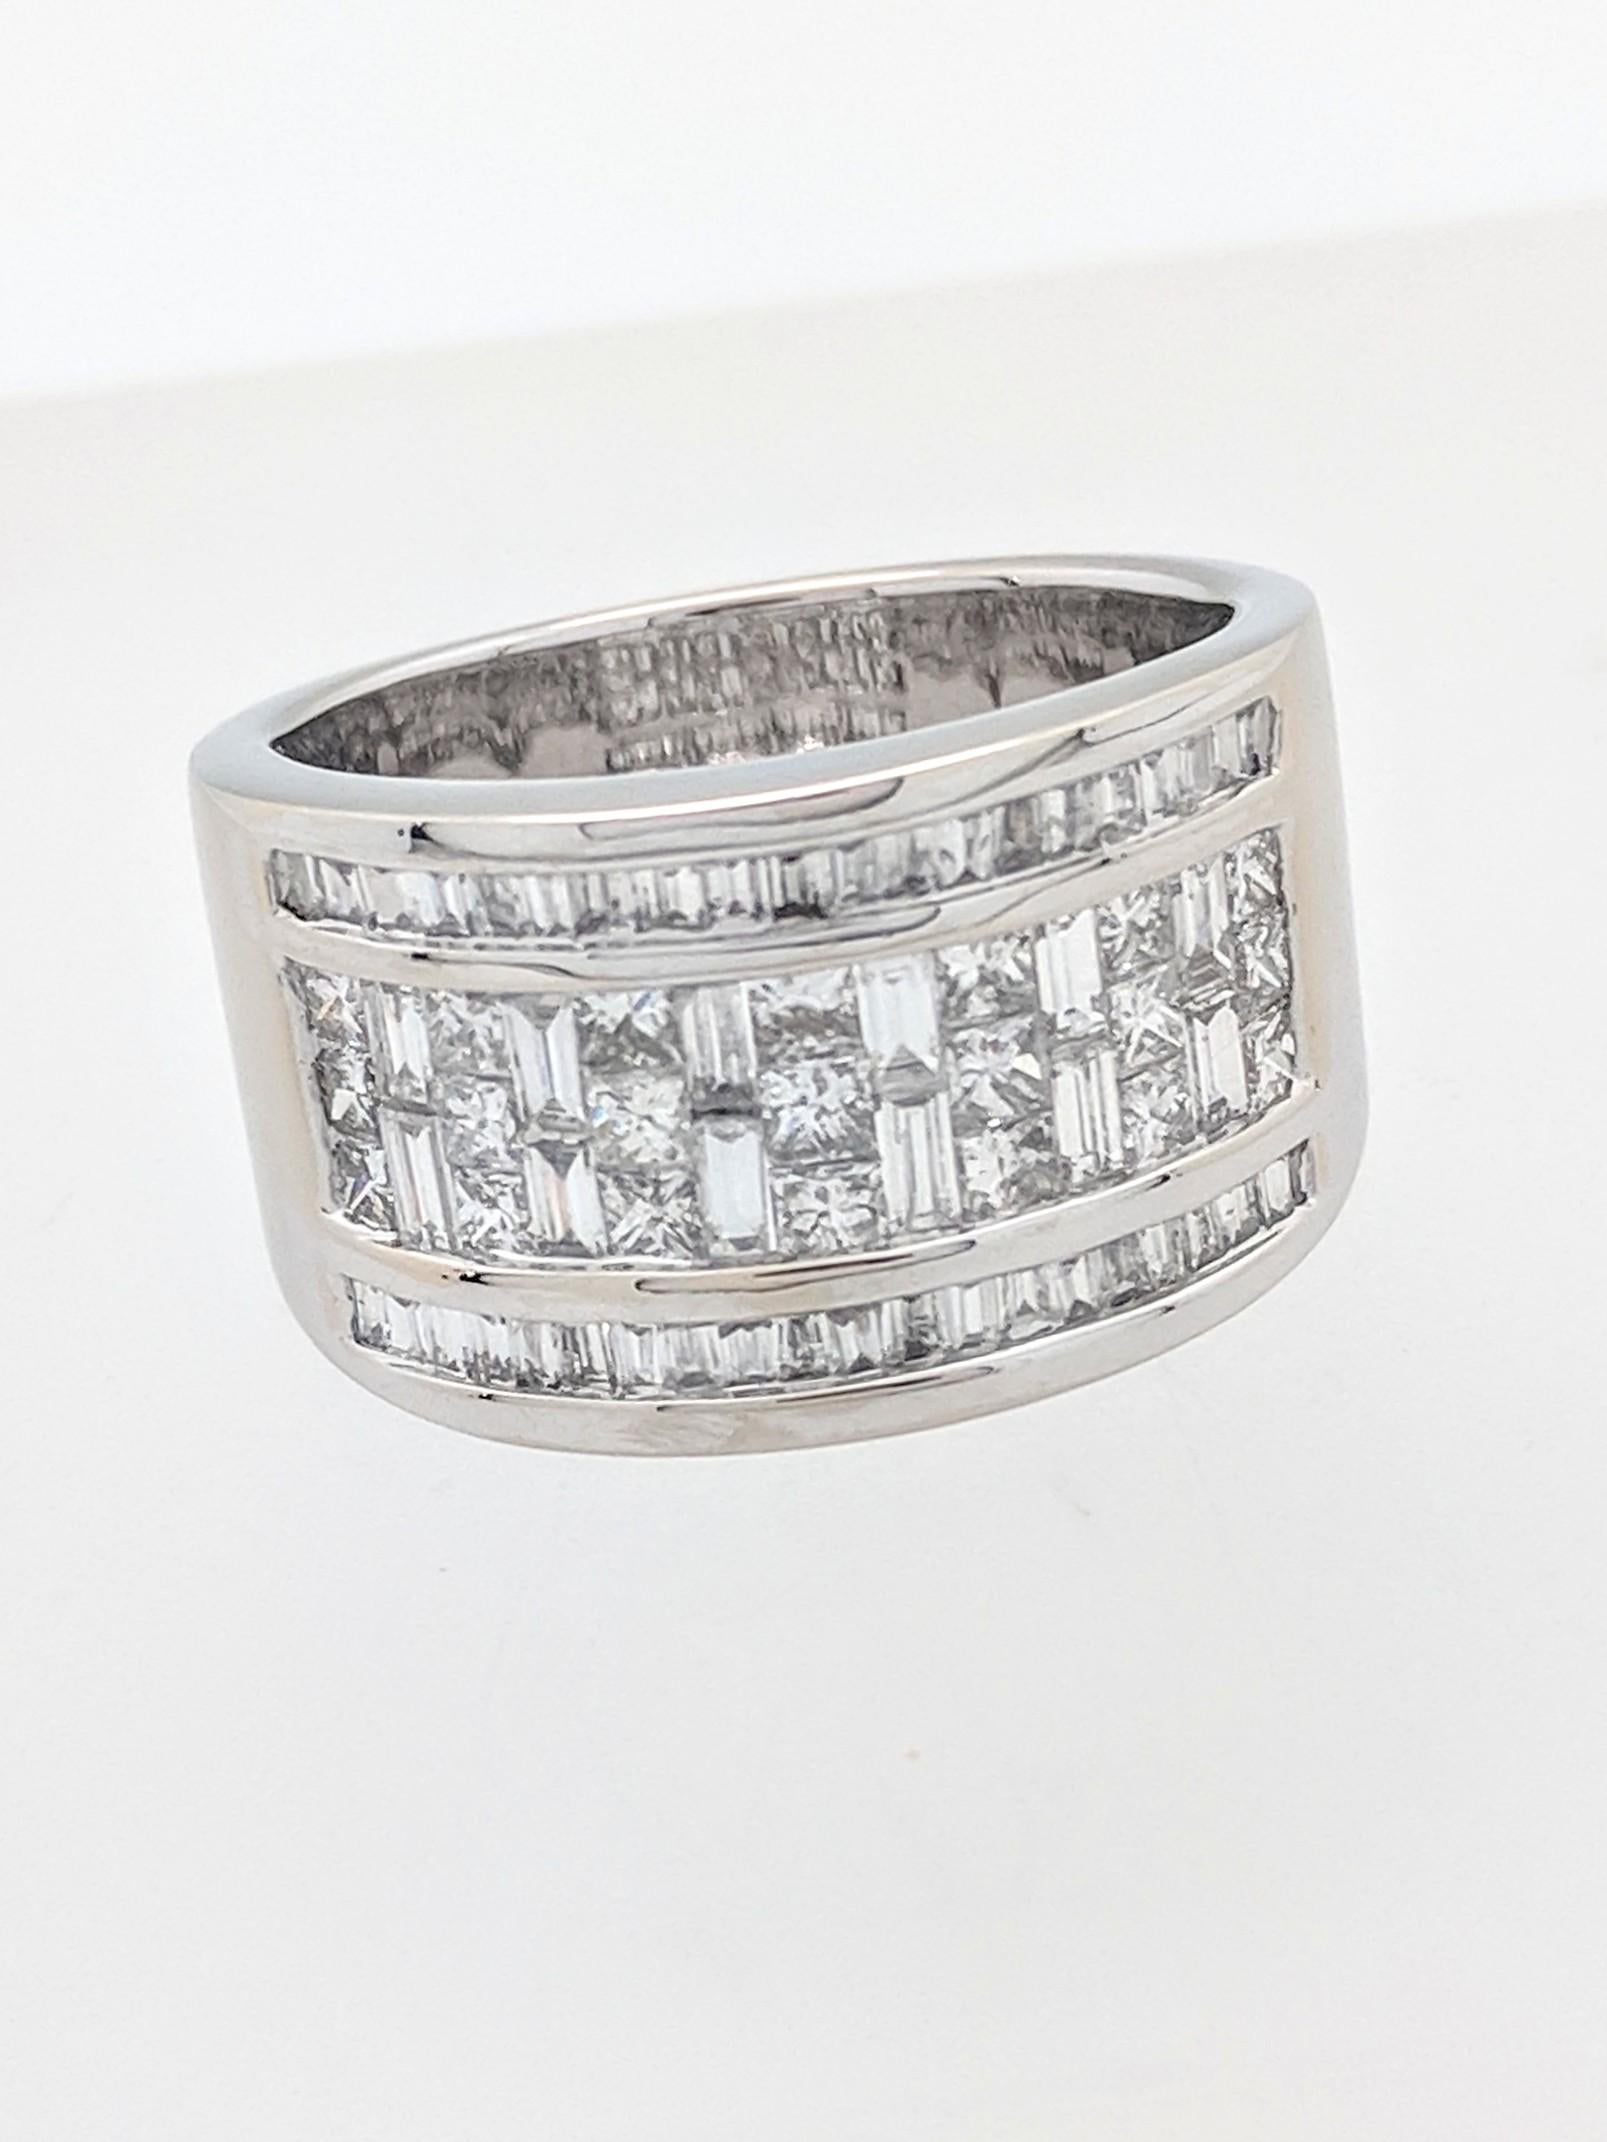 You are viewing a Beautiful Baguette & Princess Cut Diamond Wide Band.

This ring is crafted from 14k white gold and weighs 10.9 grams. It features natural baguette and princess cut diamonds for an estimated 3.0ctw. We estimate the diamonds to be